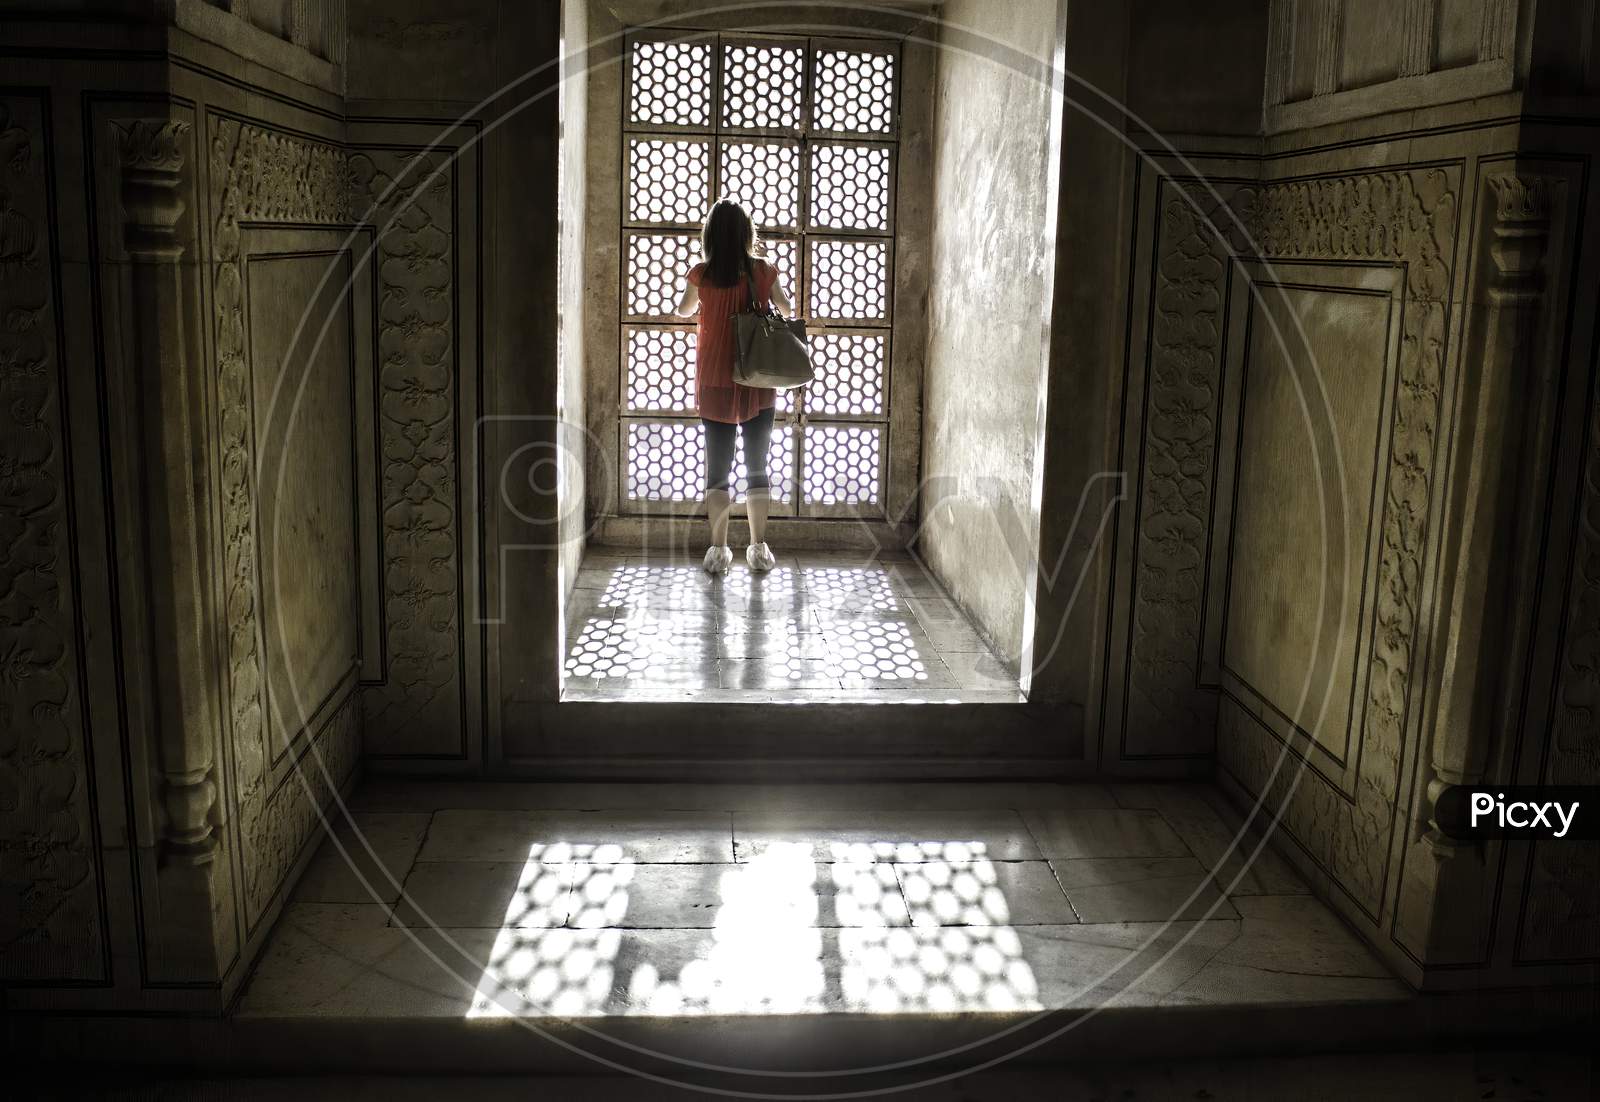 Agra, India - April 10,2014: A Female Tourist Wearing Plastic Bag Shoes Inside Tajmahal Dome And Sun Rays Coming Through Windows